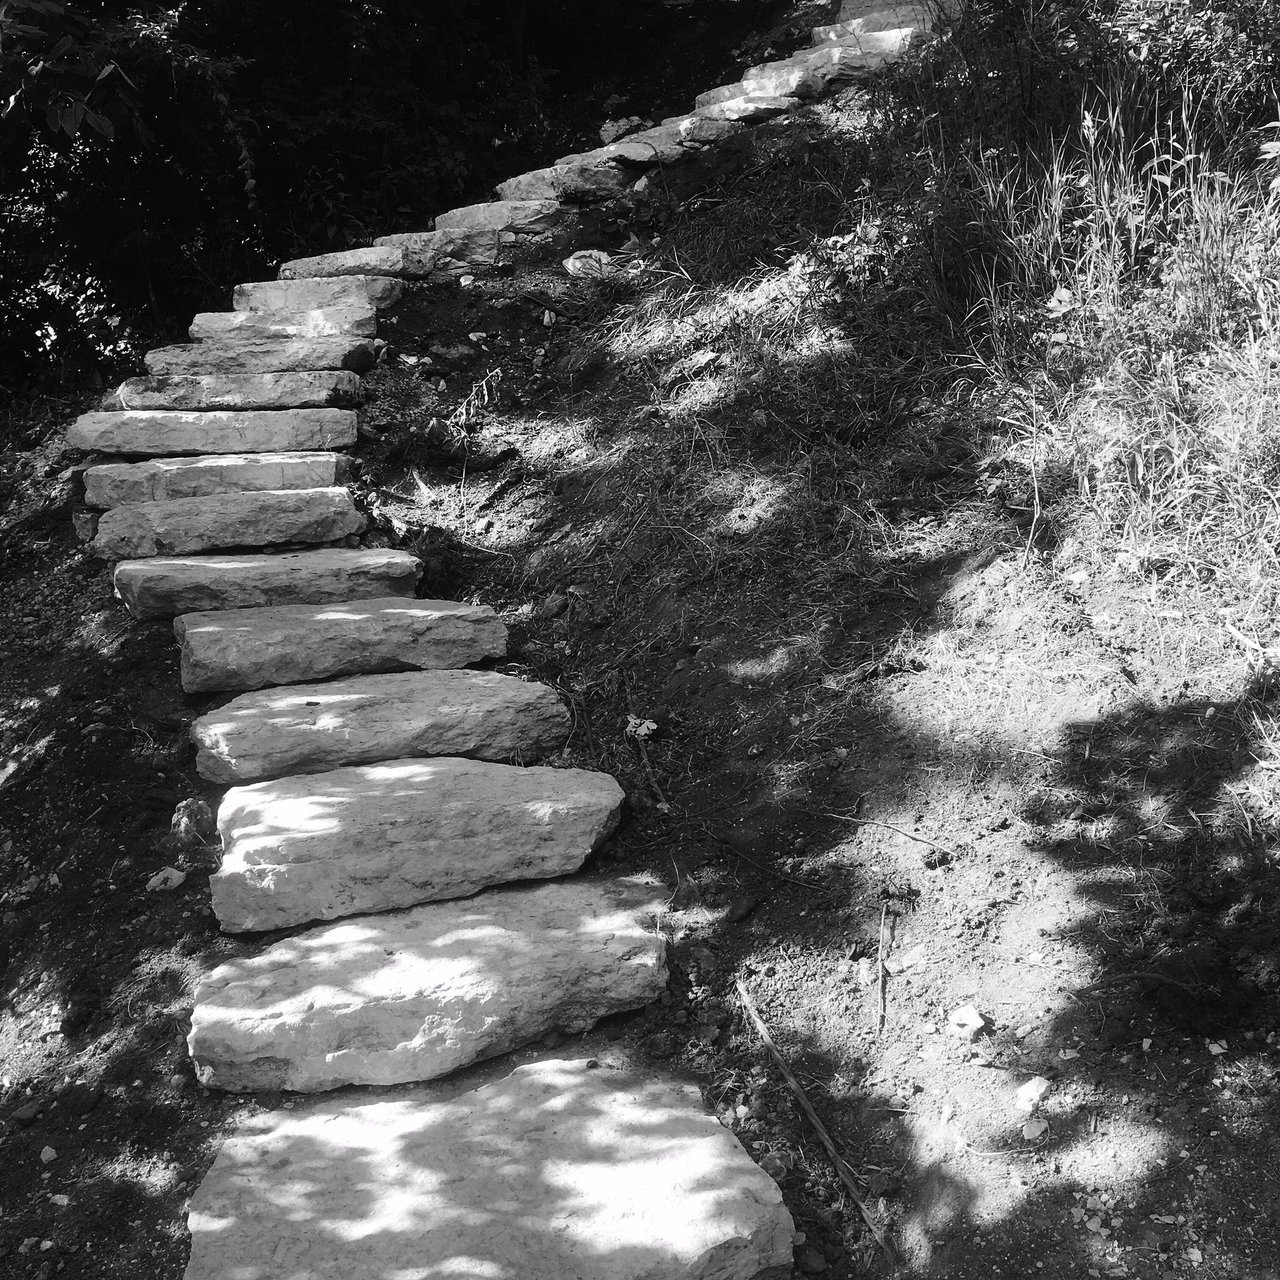 The "Grand Staircase" is well under way. #drystone #driftlessdrystone #staircase https://t.co/xMADxD1Guj